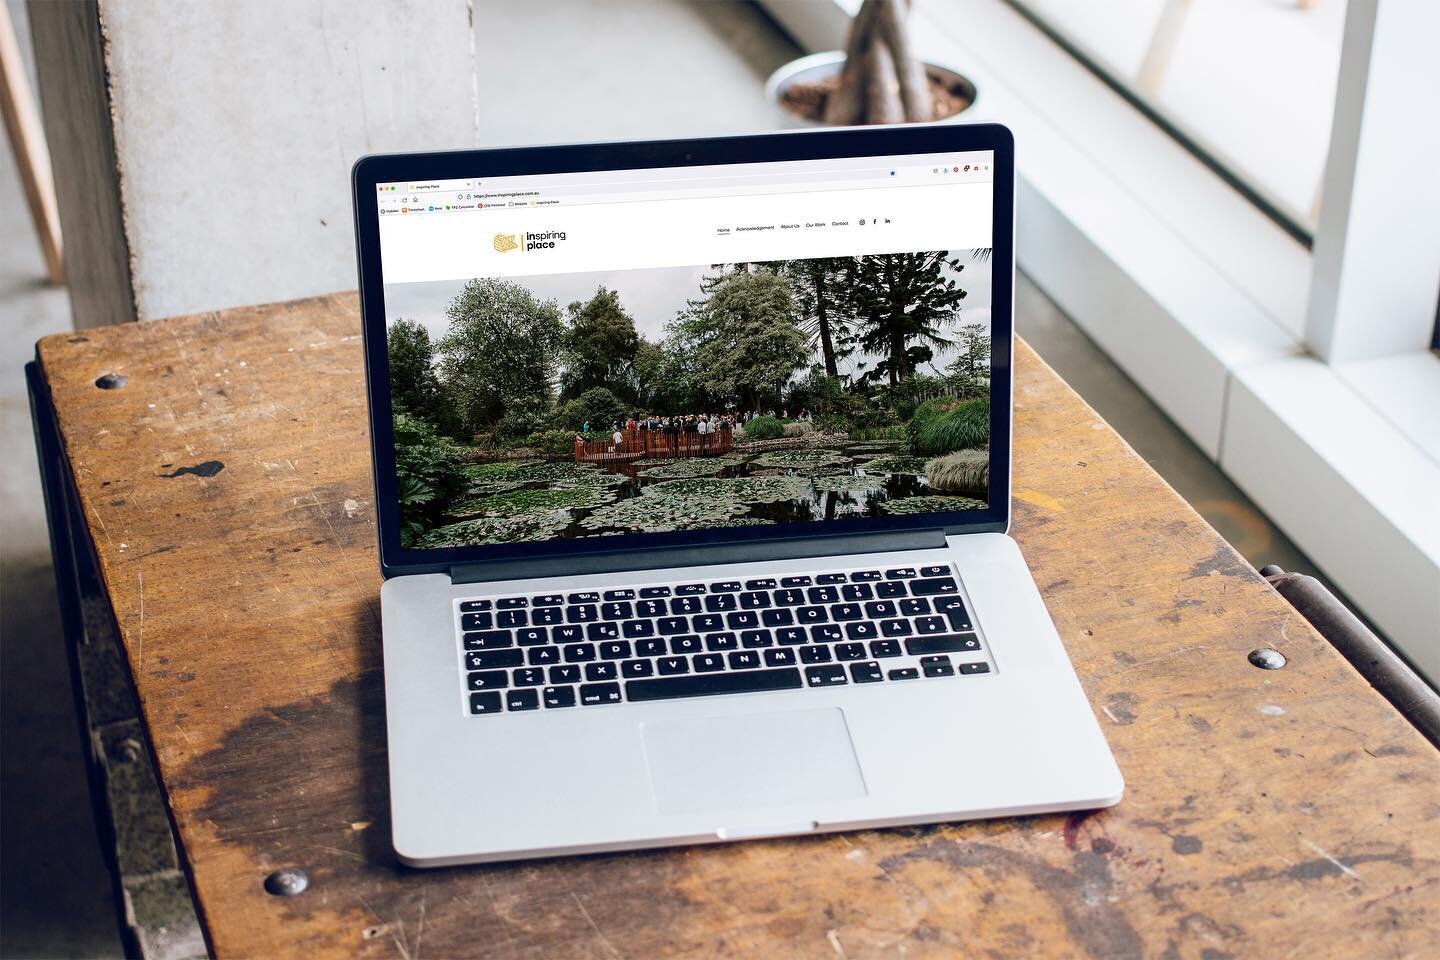 Our new website is live!! Head over to www.inspiringplace.com.au to see what we&rsquo;ve been up to 🎉 link in bio #landscapearchitecture #landscapearchitectureaustralia #newwebsitefeels #inspiringplace_au